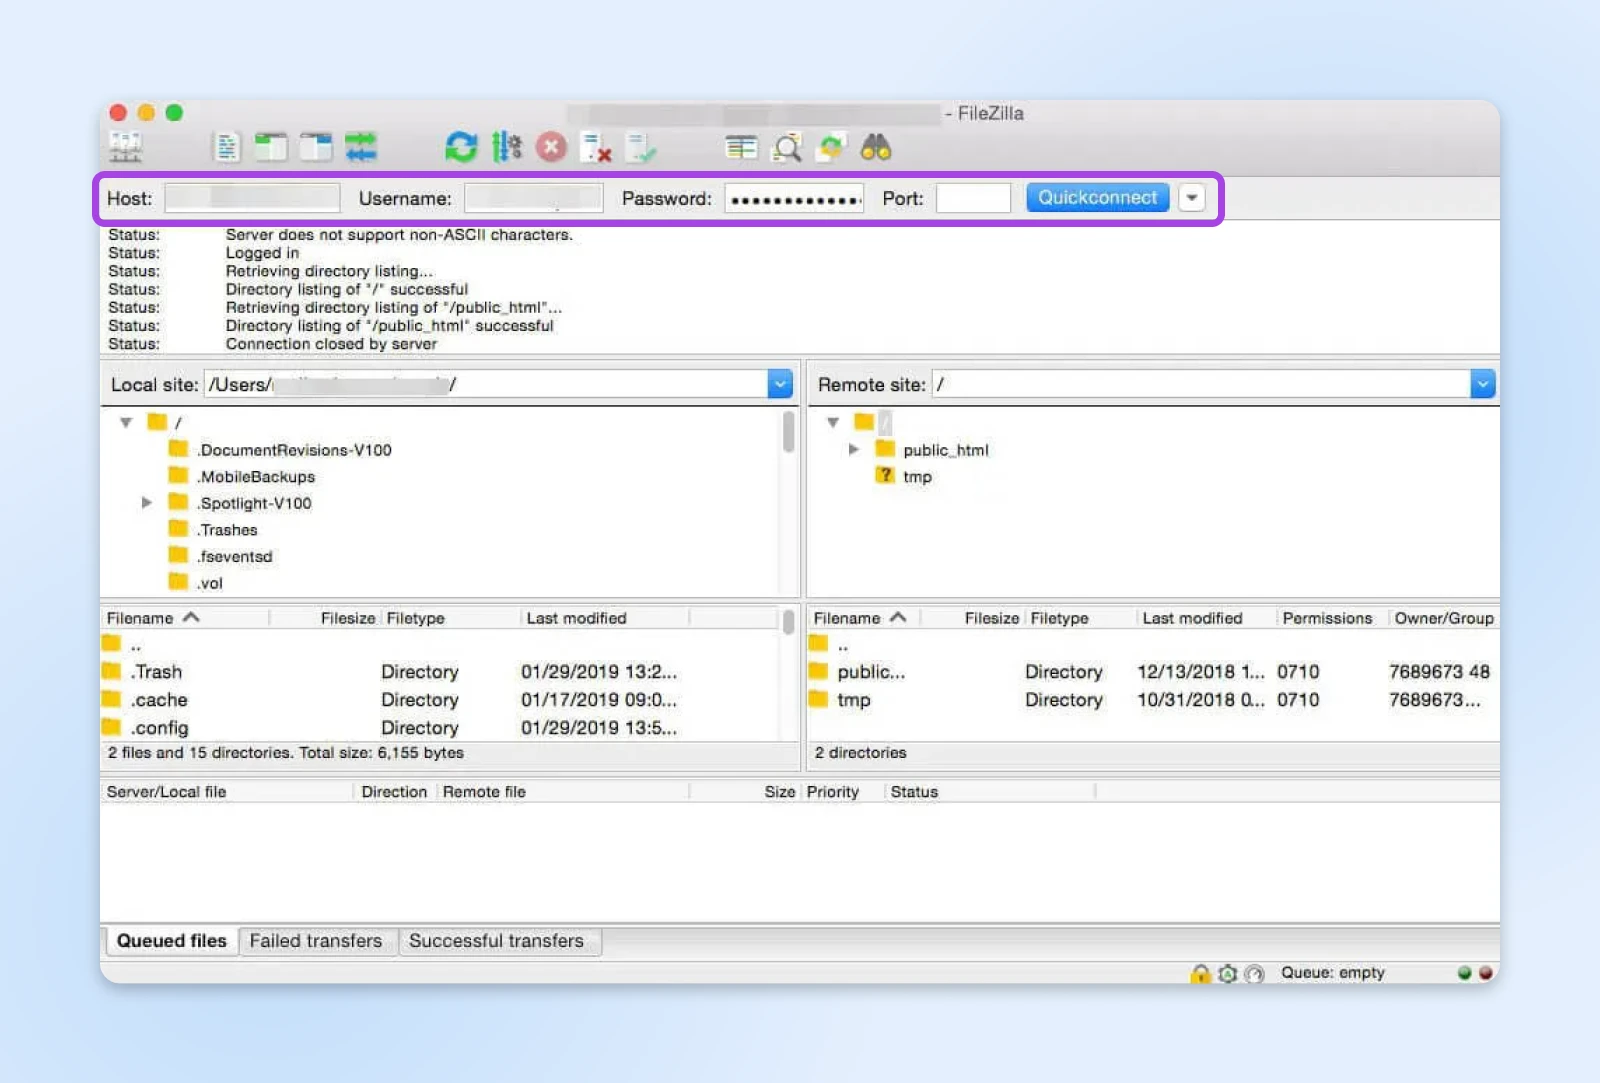 FileZilla FTP interface with "Quickconnect" option highlighted and connection status, local remote directory structures.